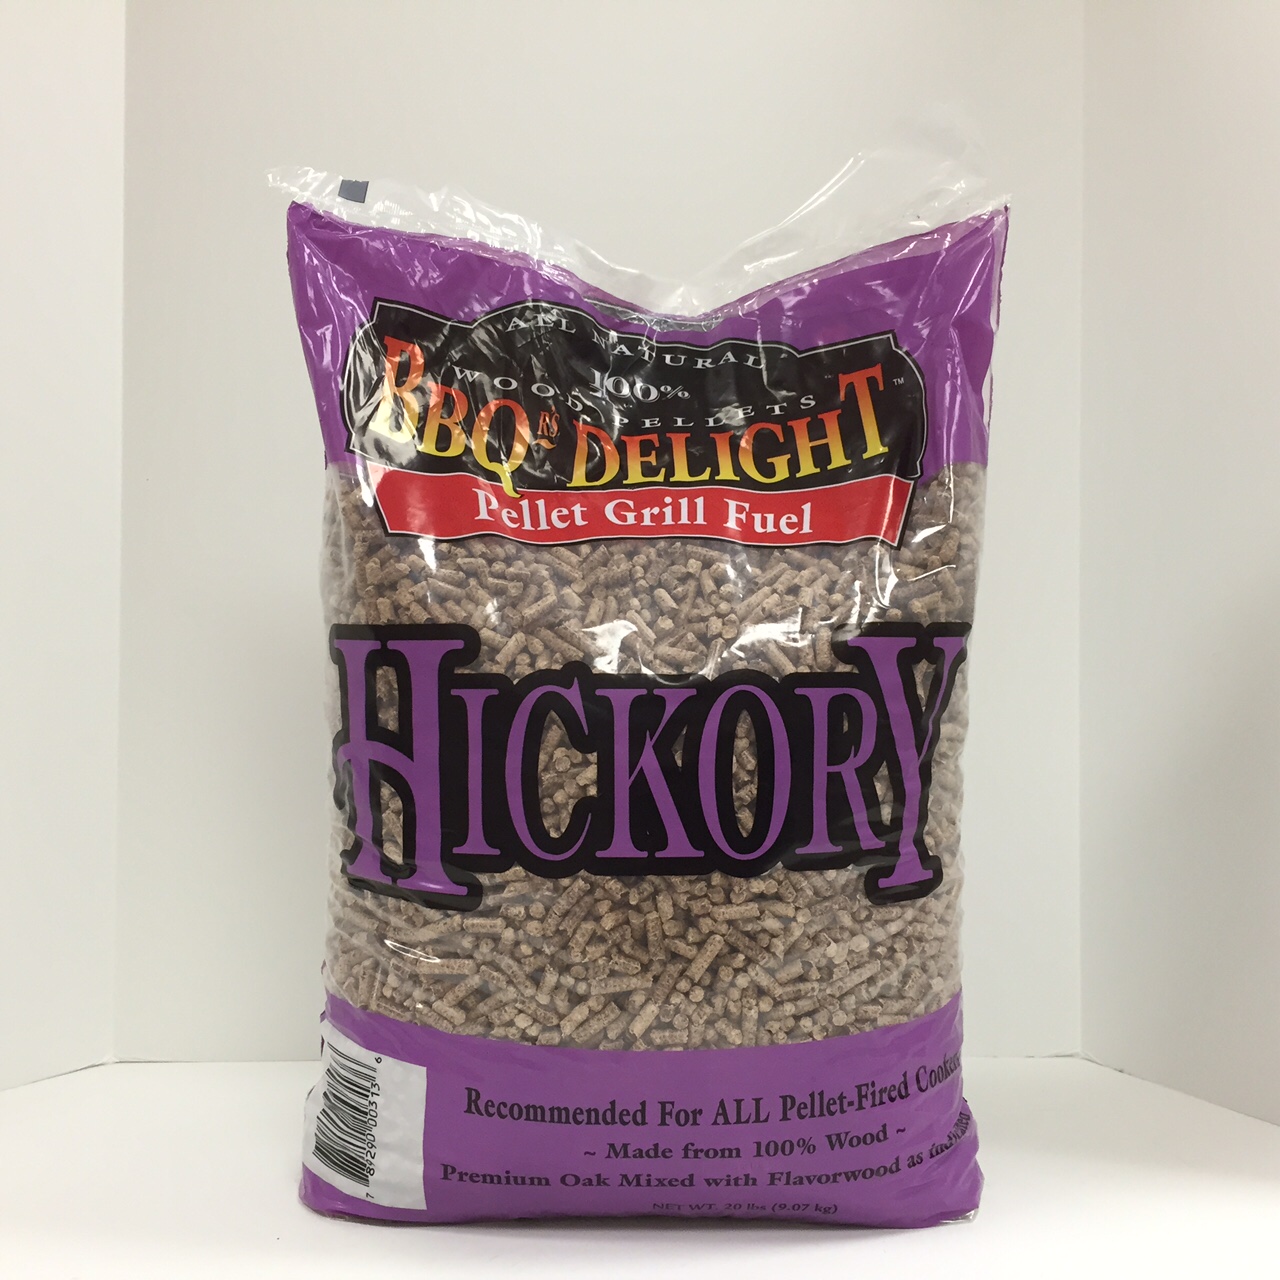 Hickory — 40 lbs. — 2 bags | BBQr's Delight